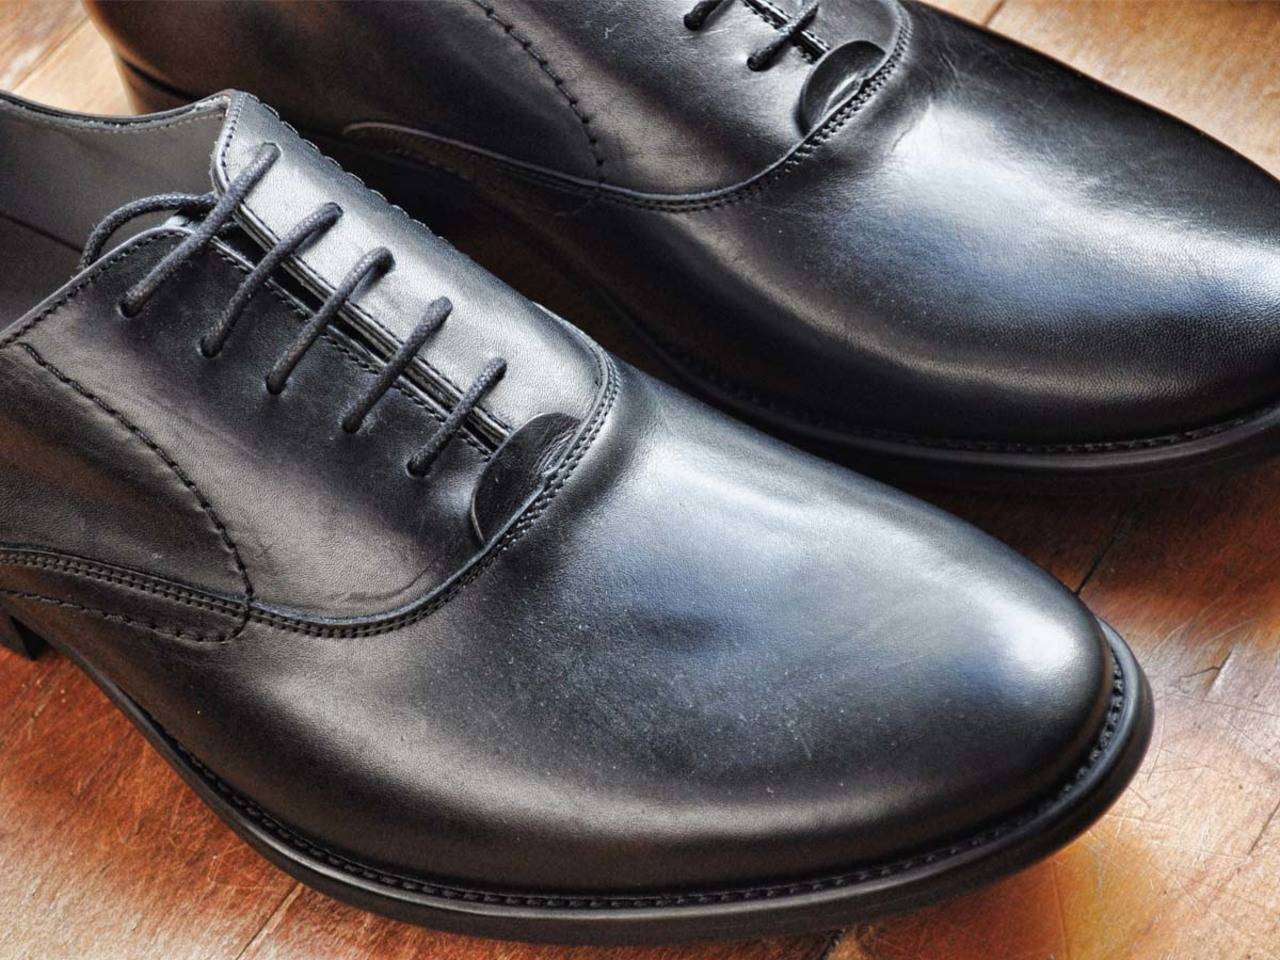 Formal Shoes for Men: 4 styles to choose from